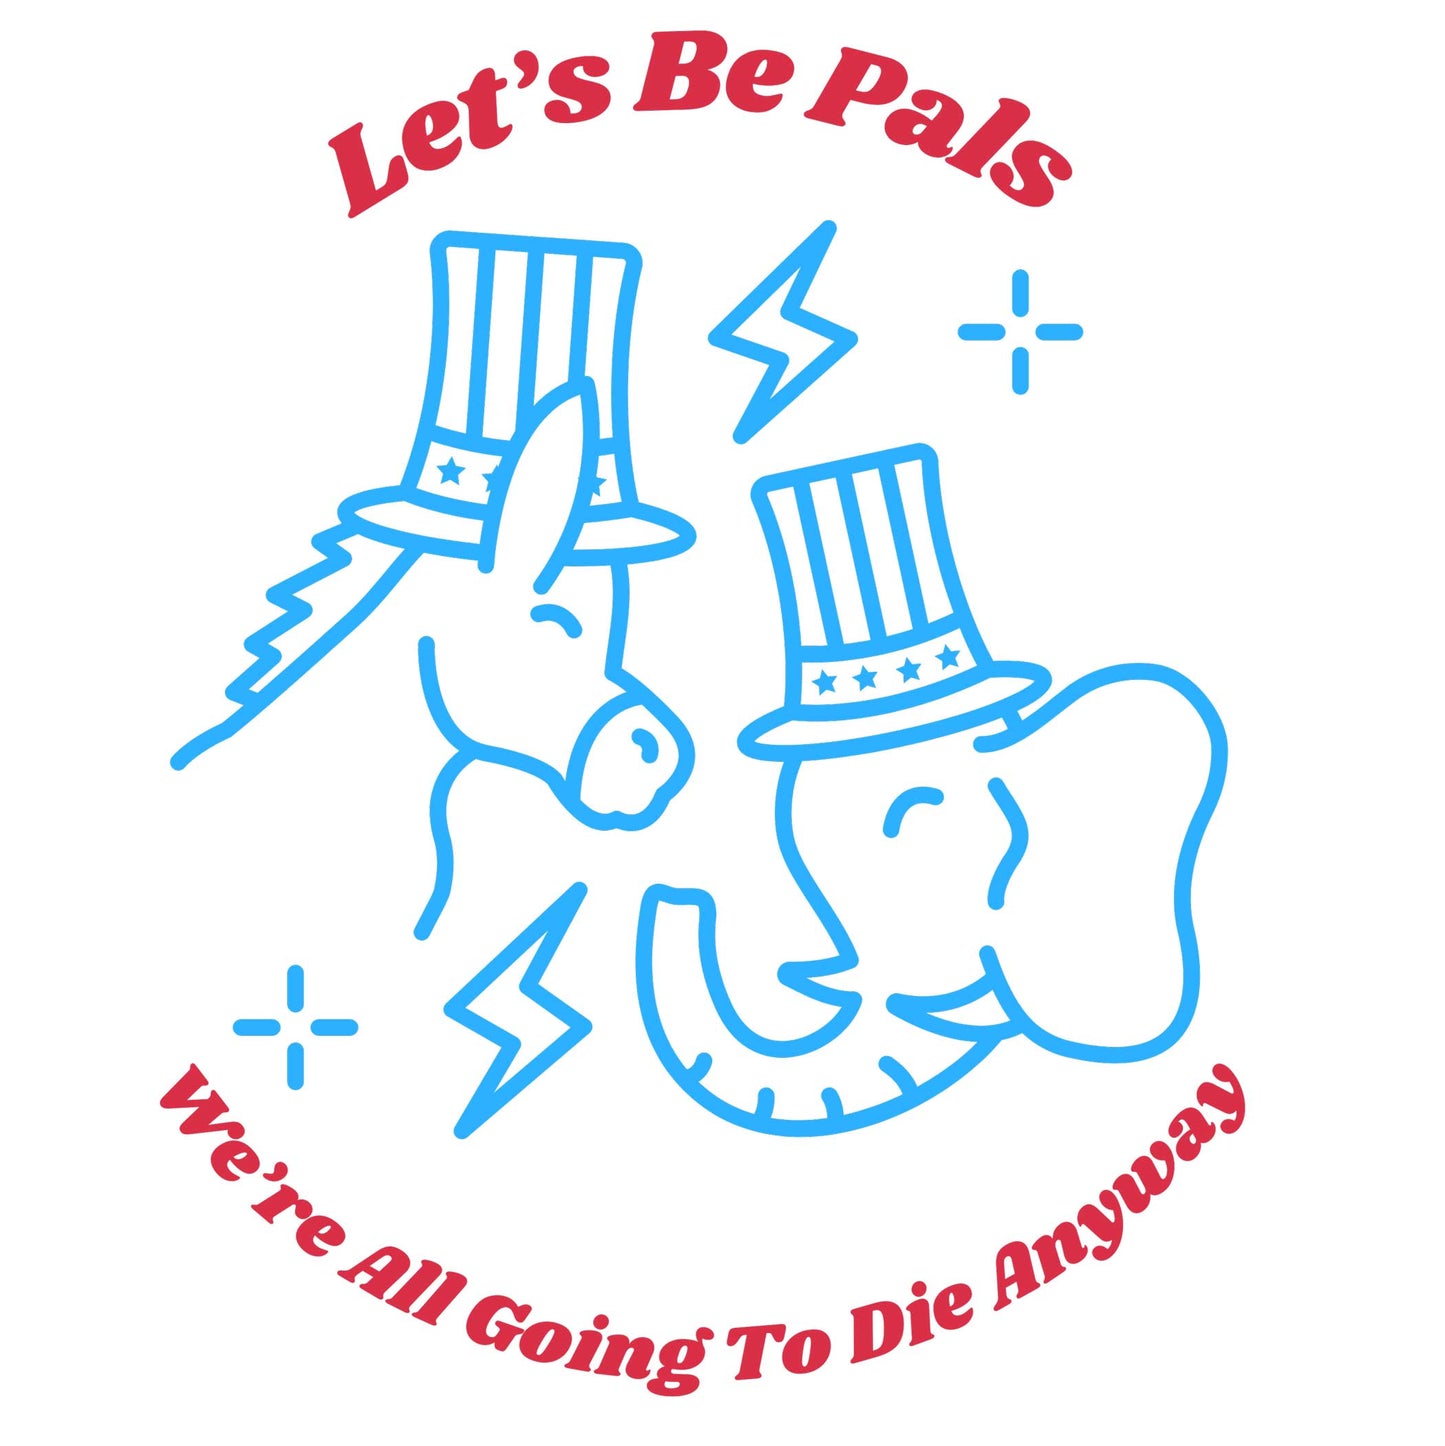 Let's Be Pals We're All Going To Die Anyway Unisex Organic Cotton T-shirt-T-Shirts-White-S-Hagsters